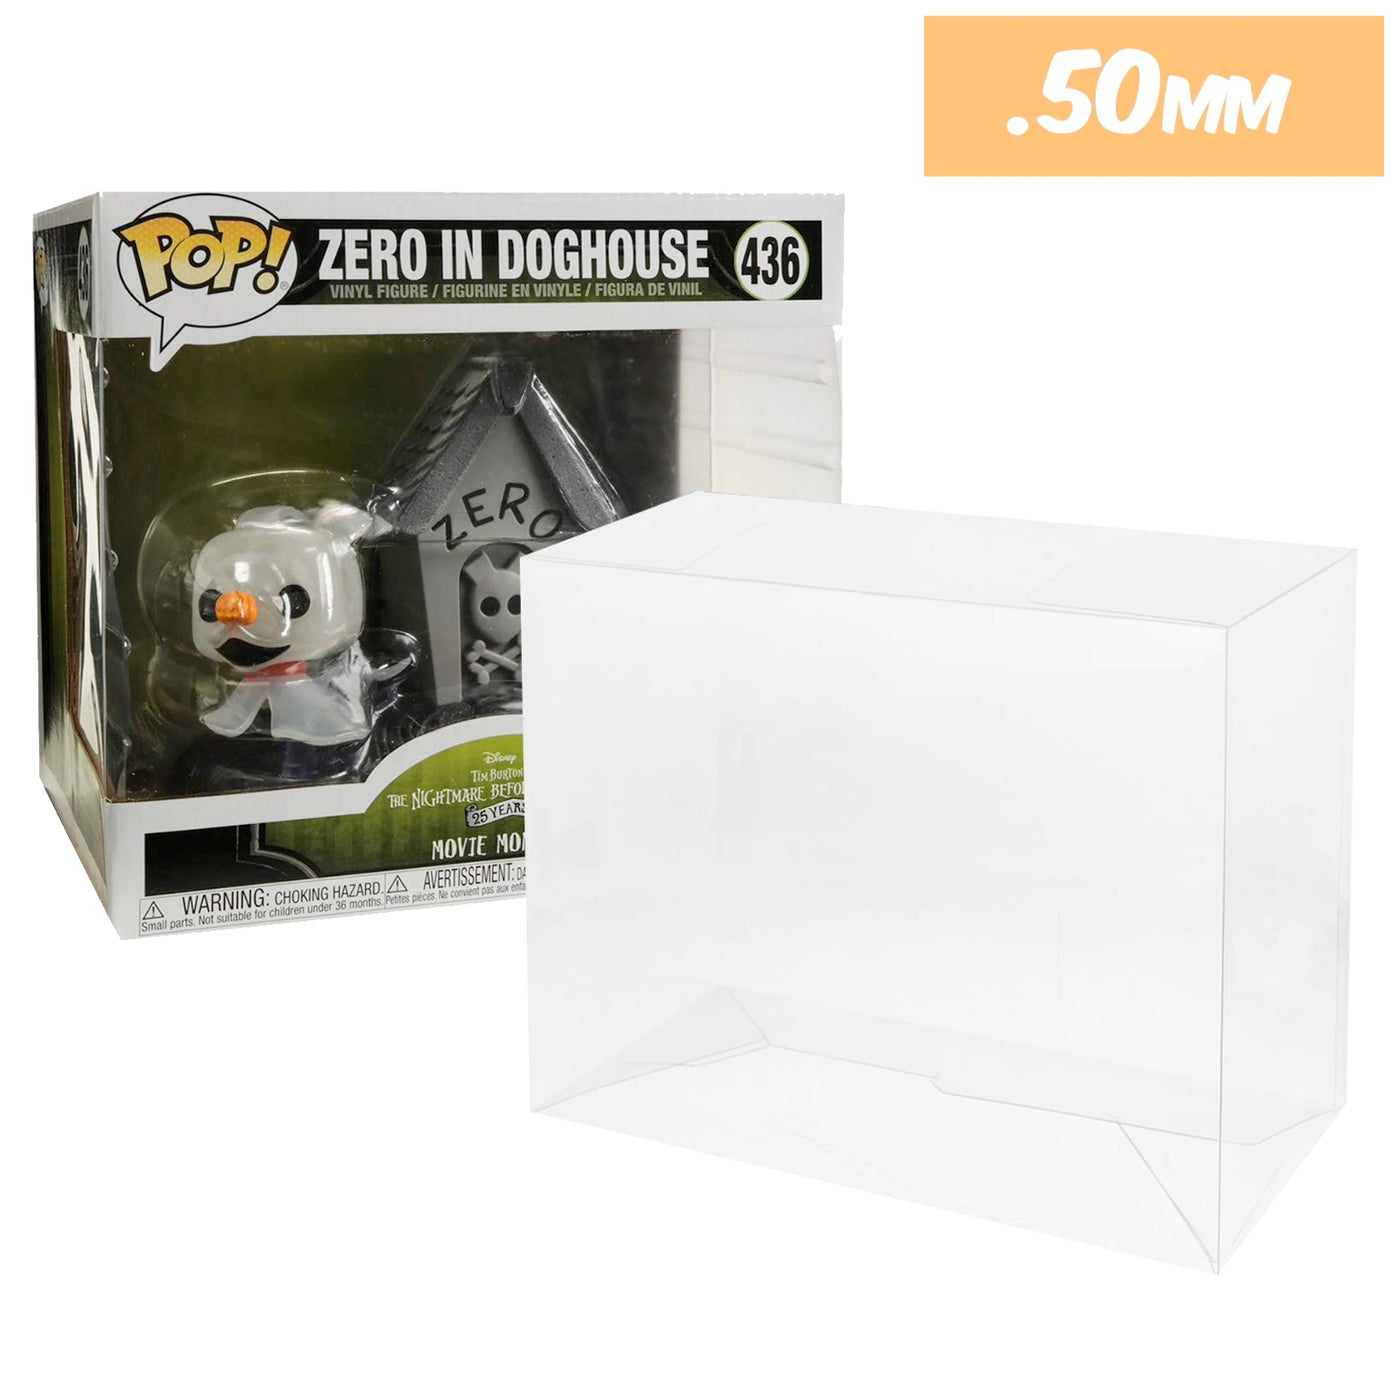 ZERO IN DOGHOUSE Pop Protectors for Funko (50mm thick) 8h x 8.75w x 6.75d